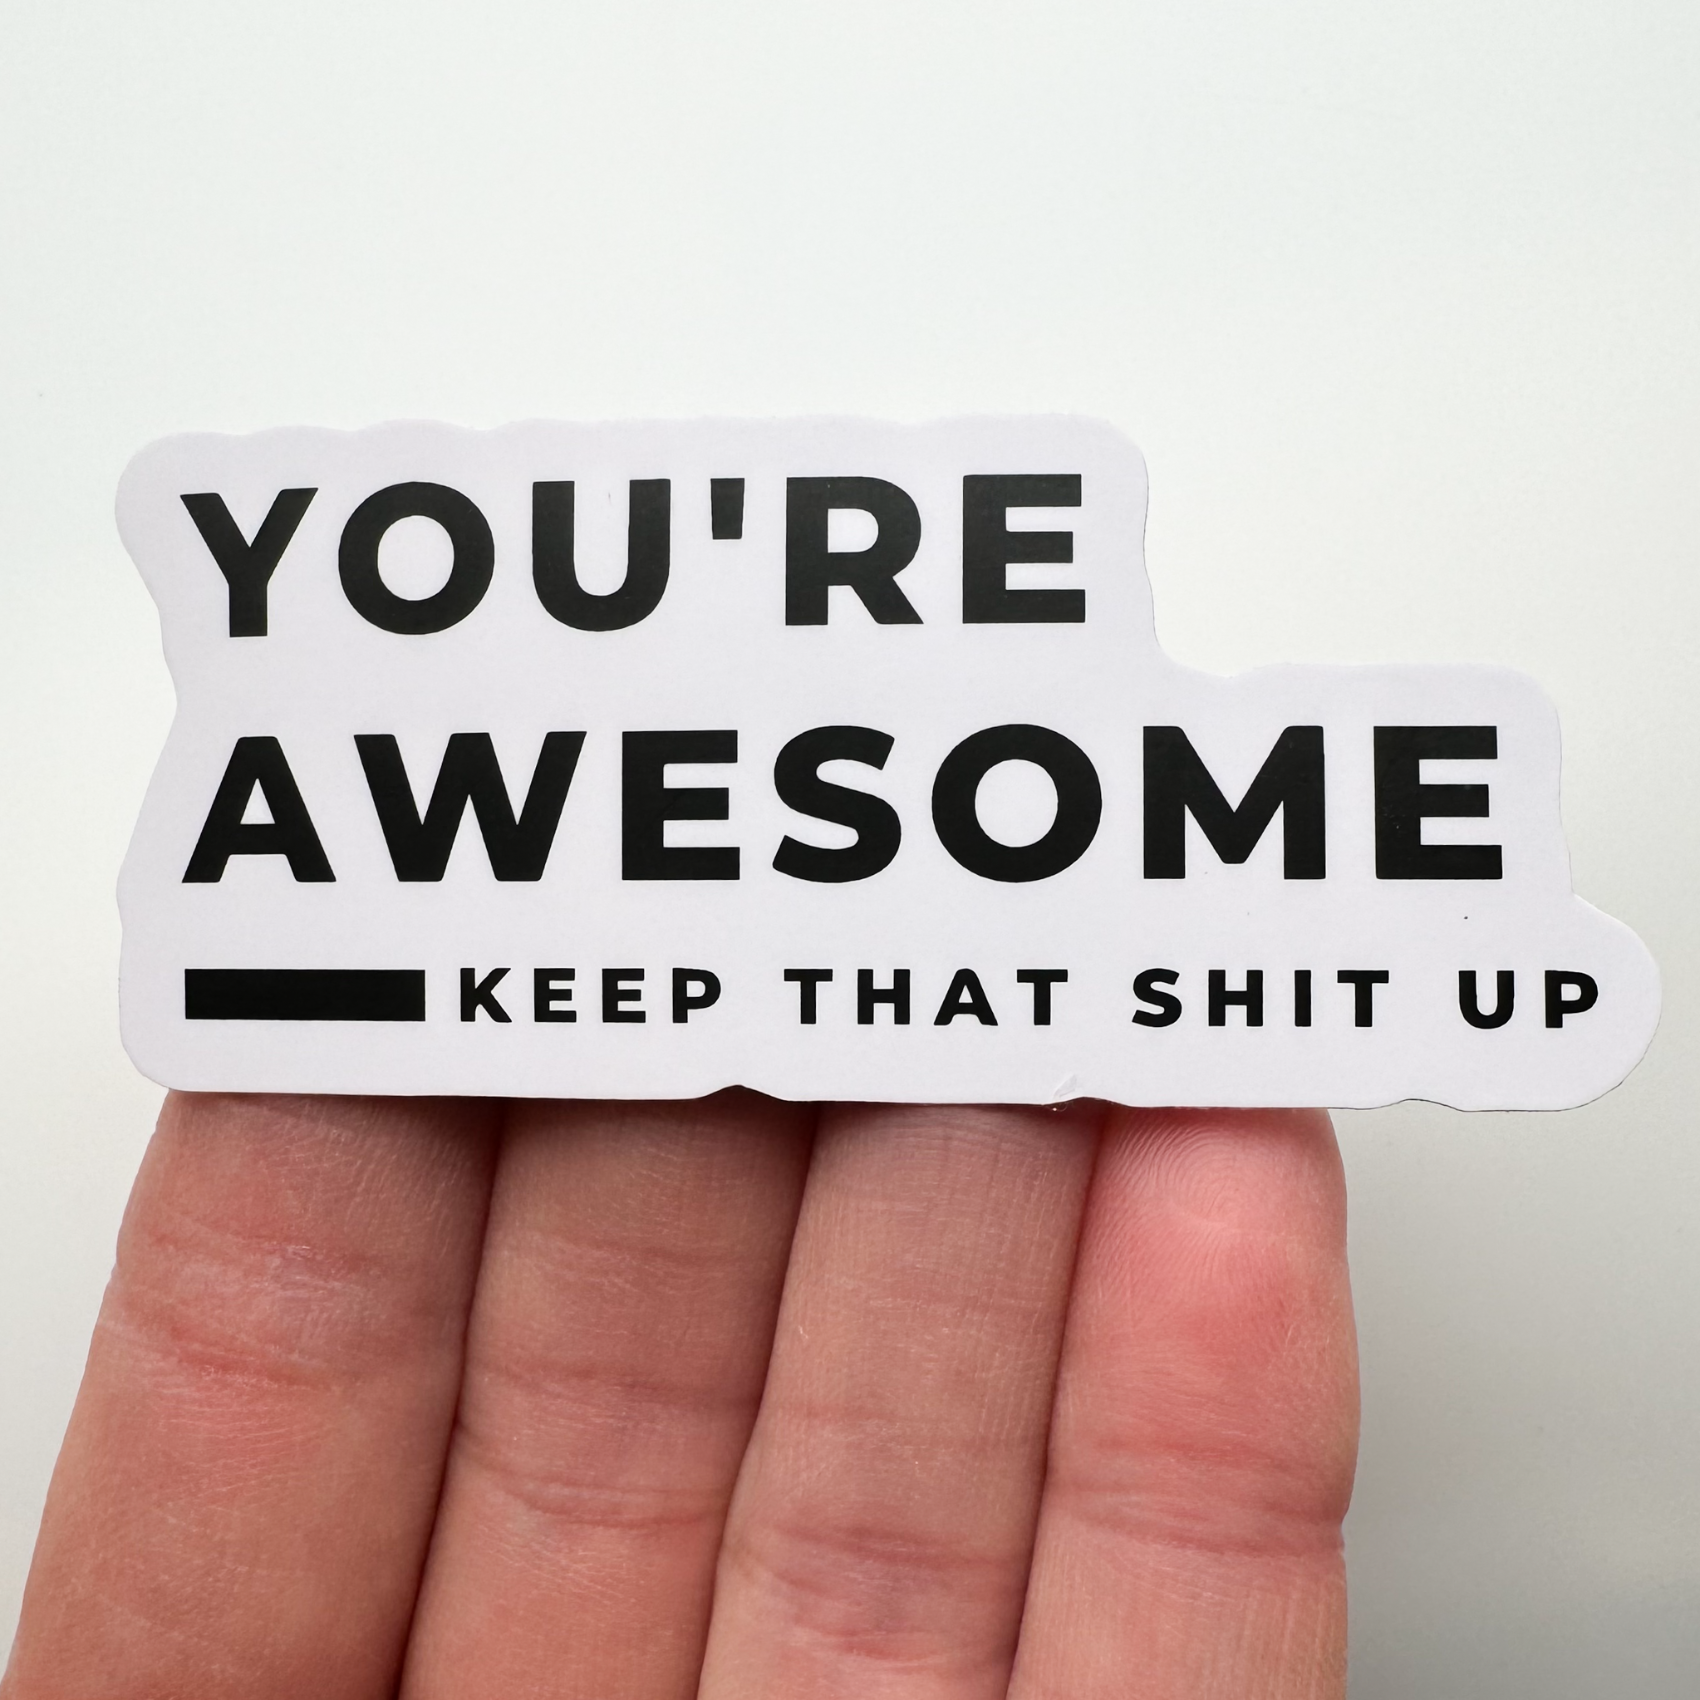 You're awesome sticker shown against fingers for scale (it's wider than 4 fingers)